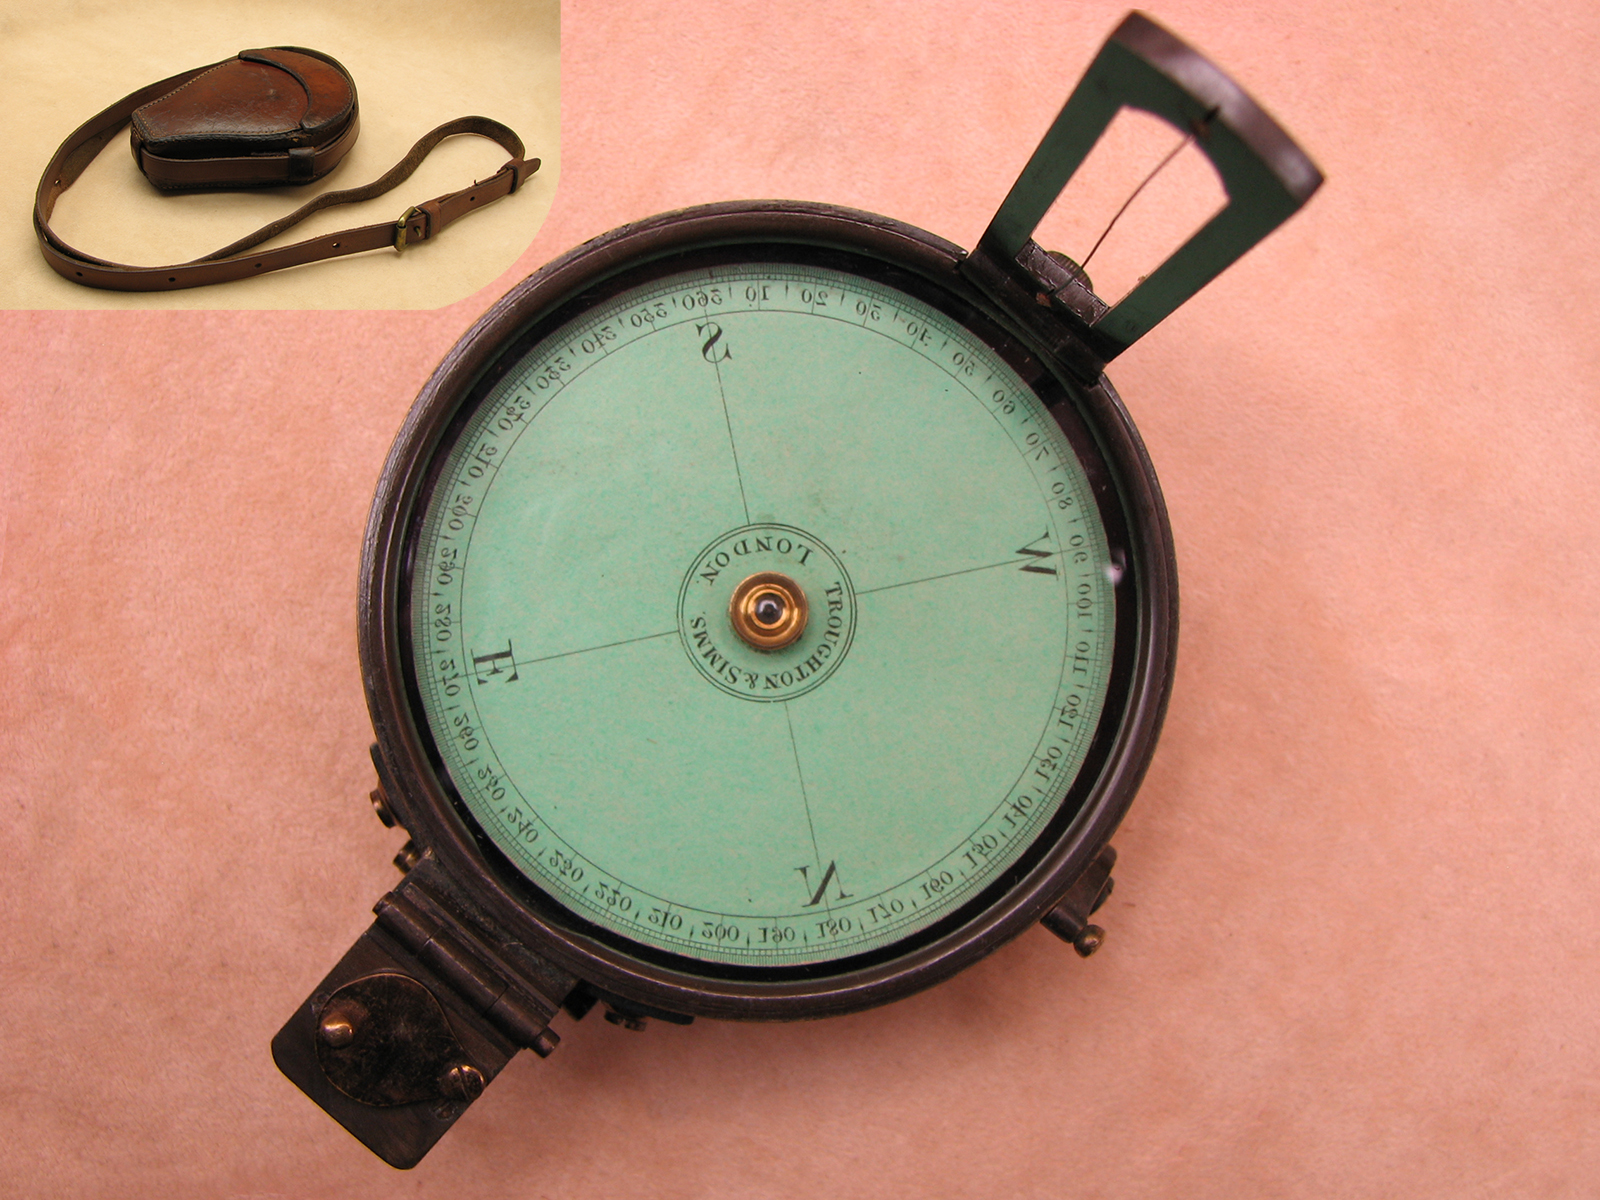 Schmalcalder type prismatic compass by Troughton & Simms with Geological Survey Scotland logo